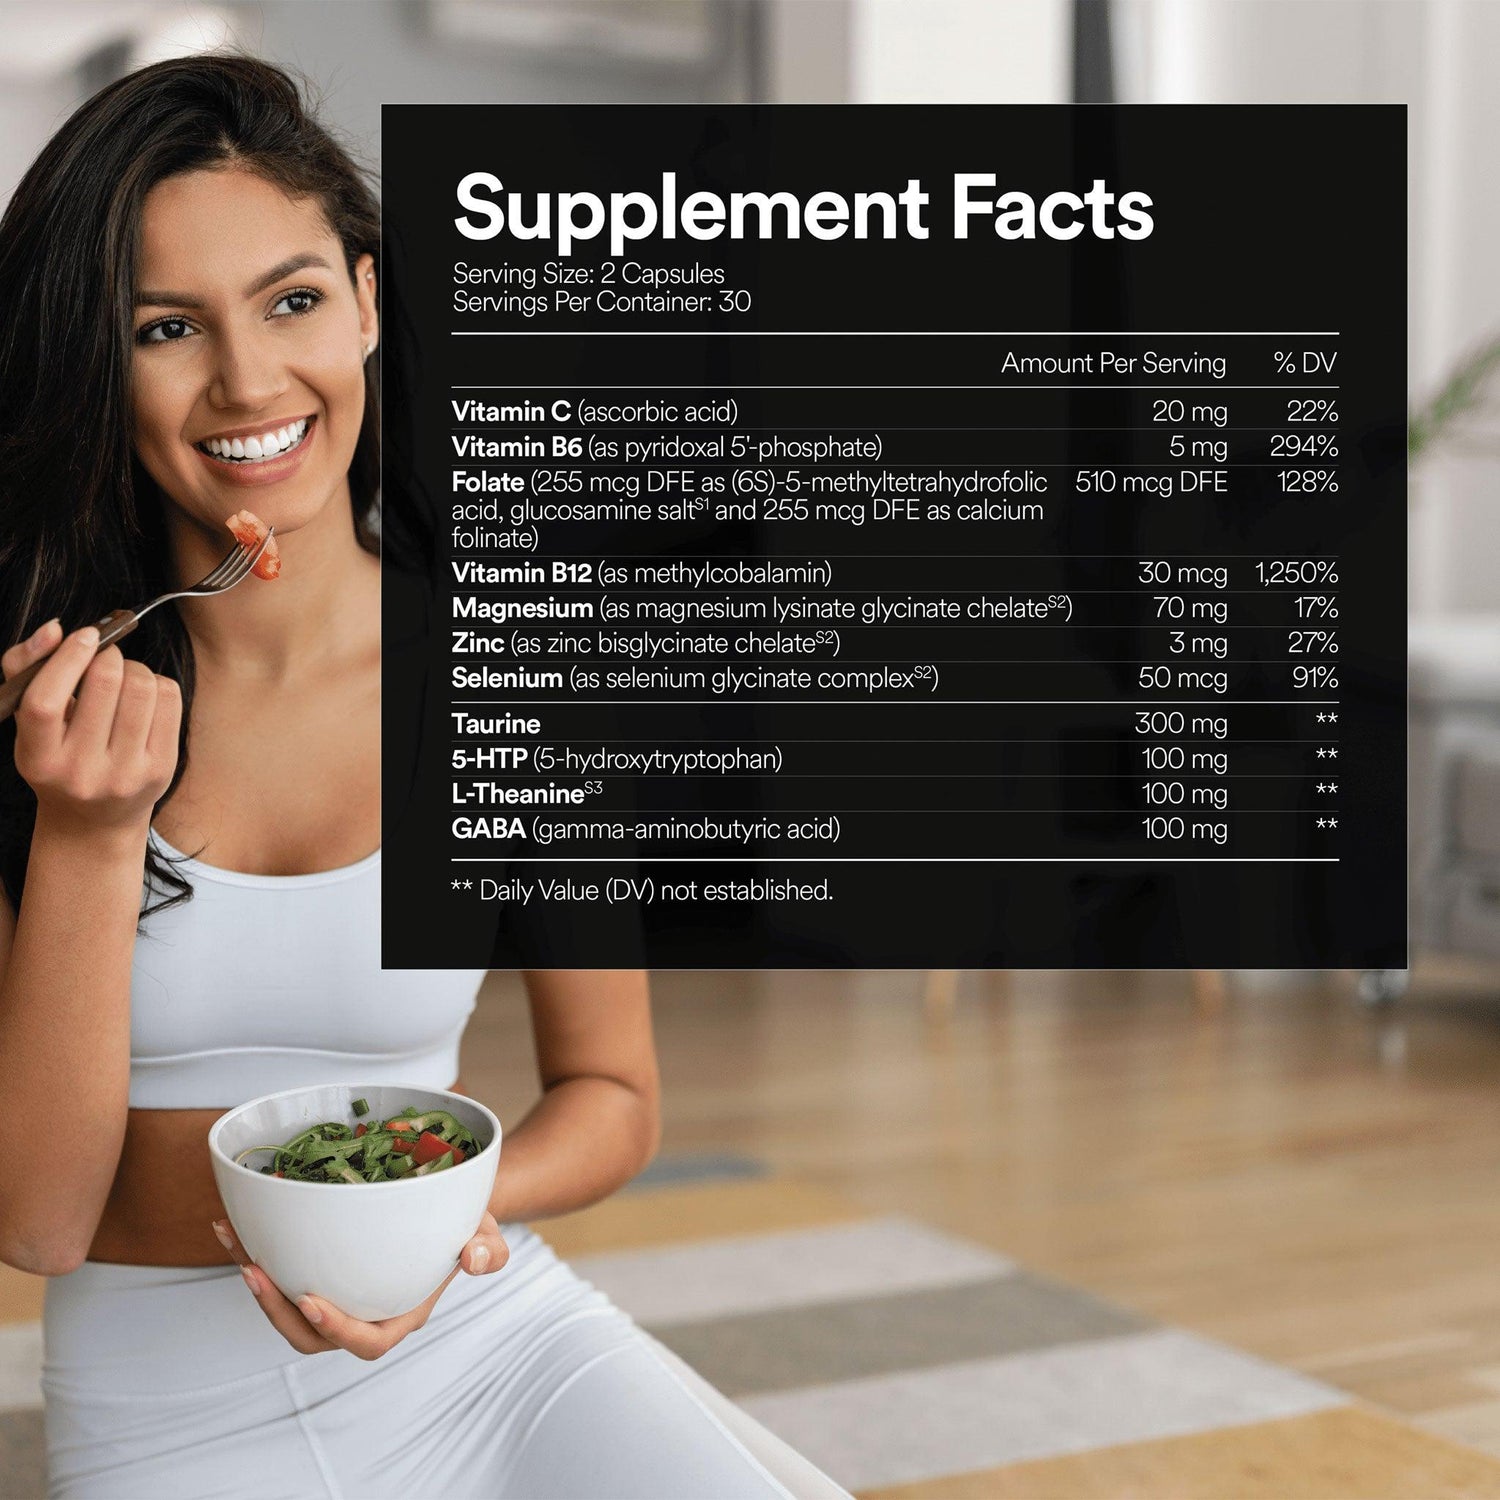 Fitties FitWell supplement facts detail